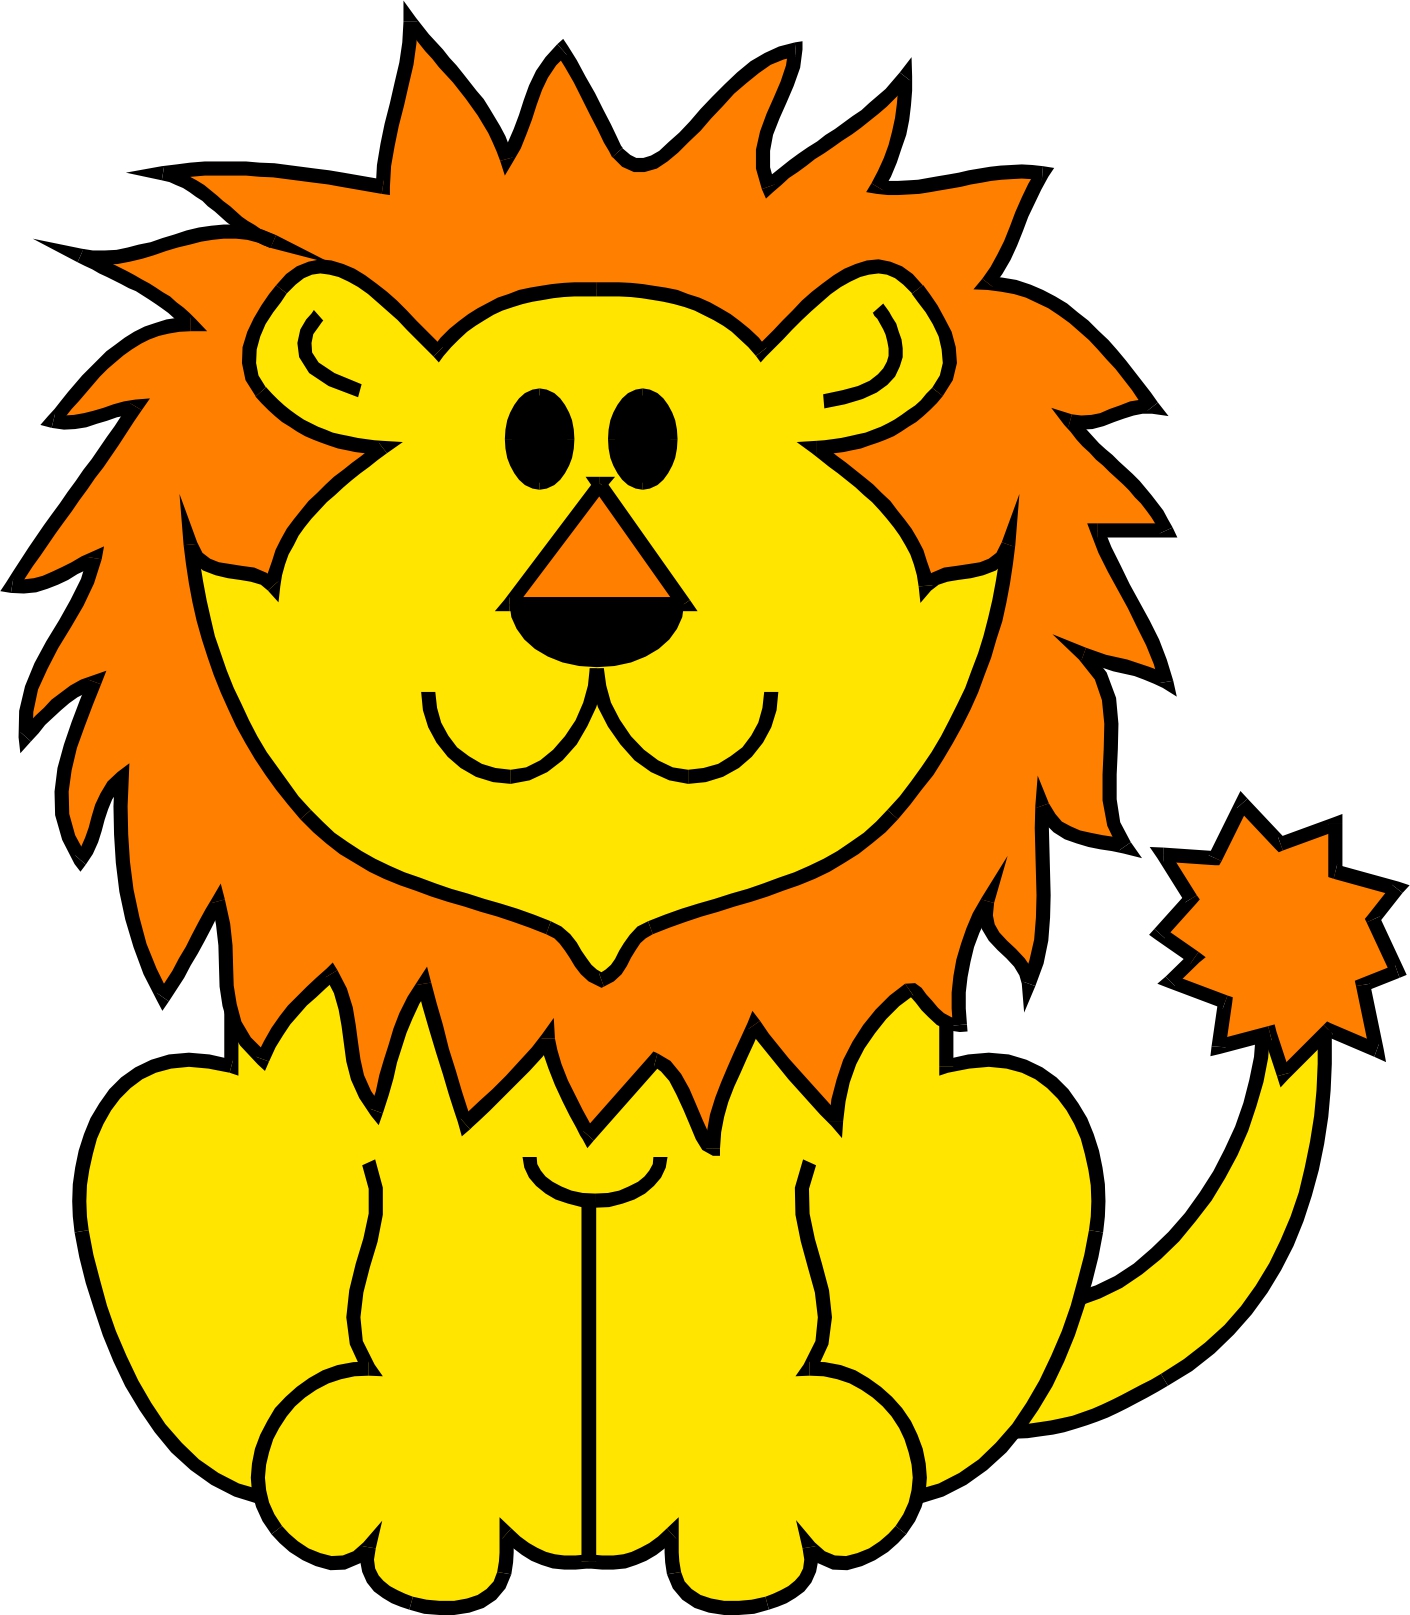 Animated Lion - ClipArt Best